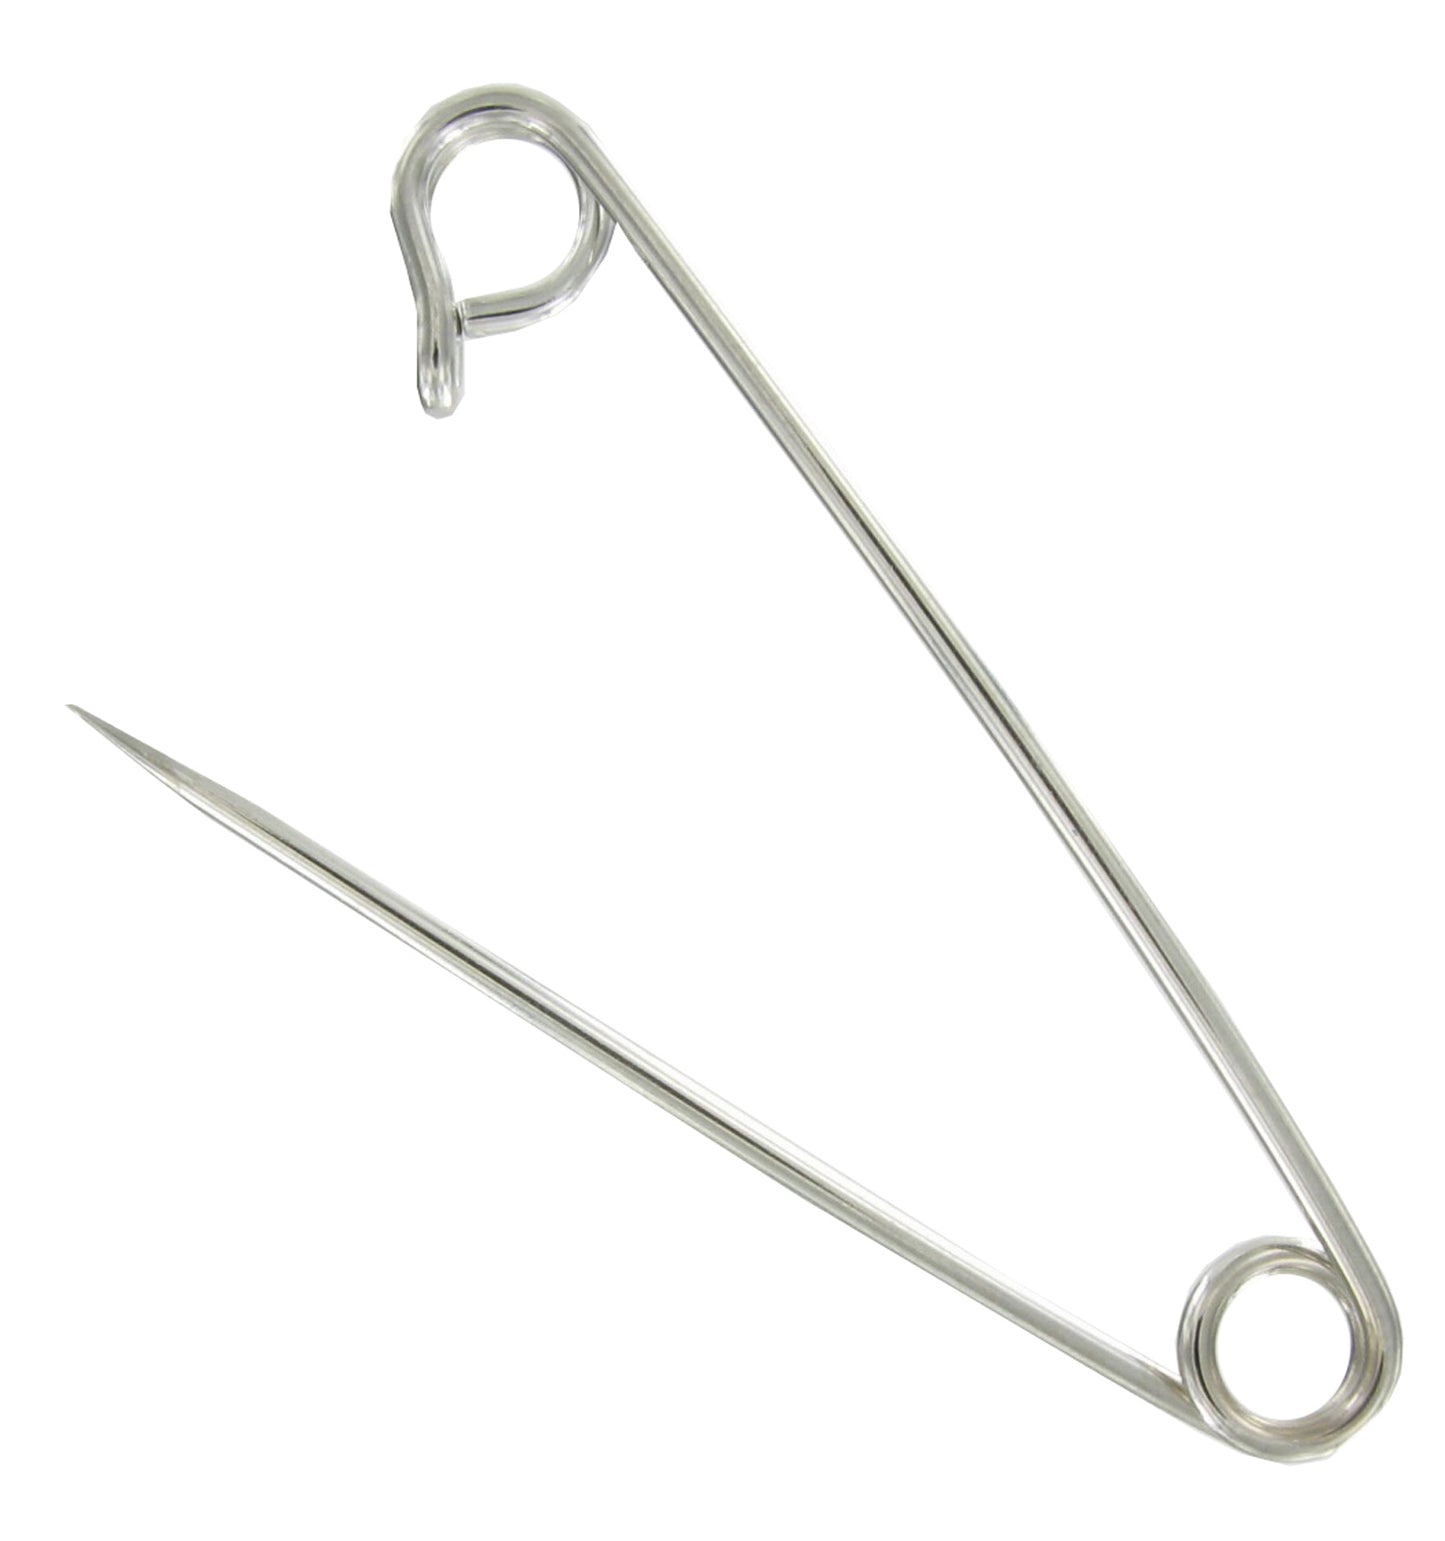 Ky & Co Made in USA Safety Pin Brooch Feminist Women Symbol End Silver Tone  2"